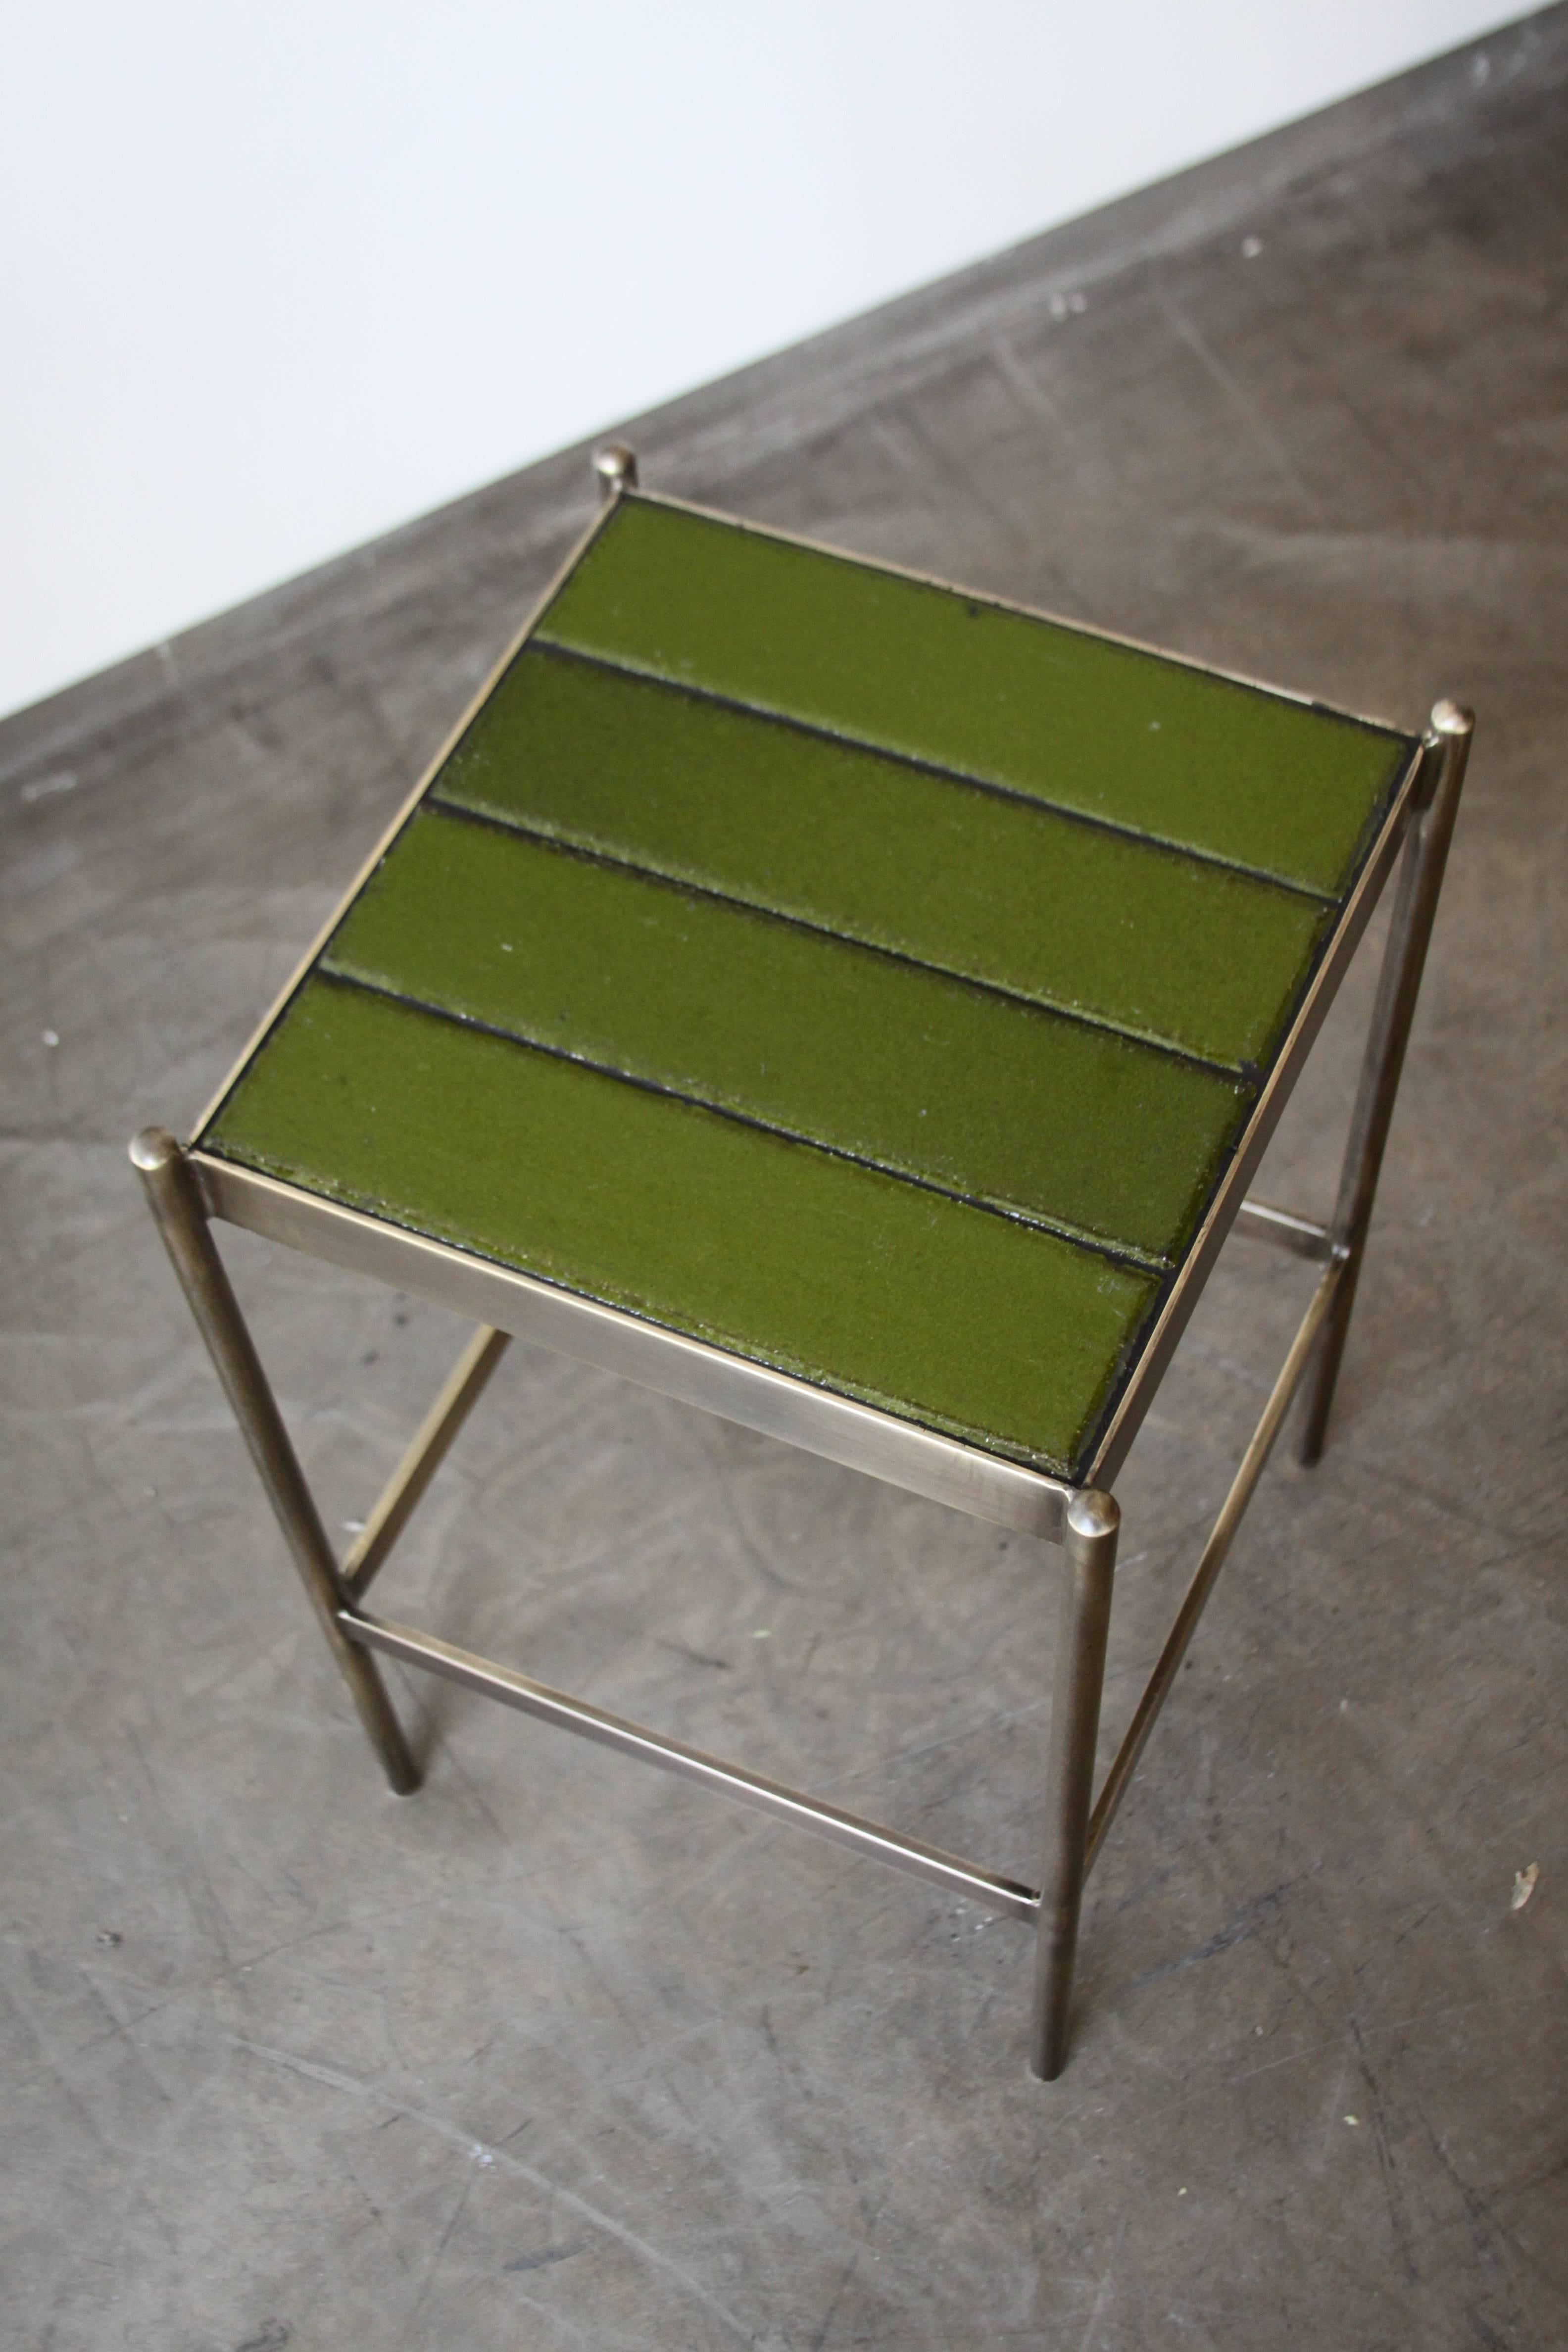 The Tile Side Table by Thomas Hayes Studio - Brass Frame In Excellent Condition For Sale In Hollywood, CA